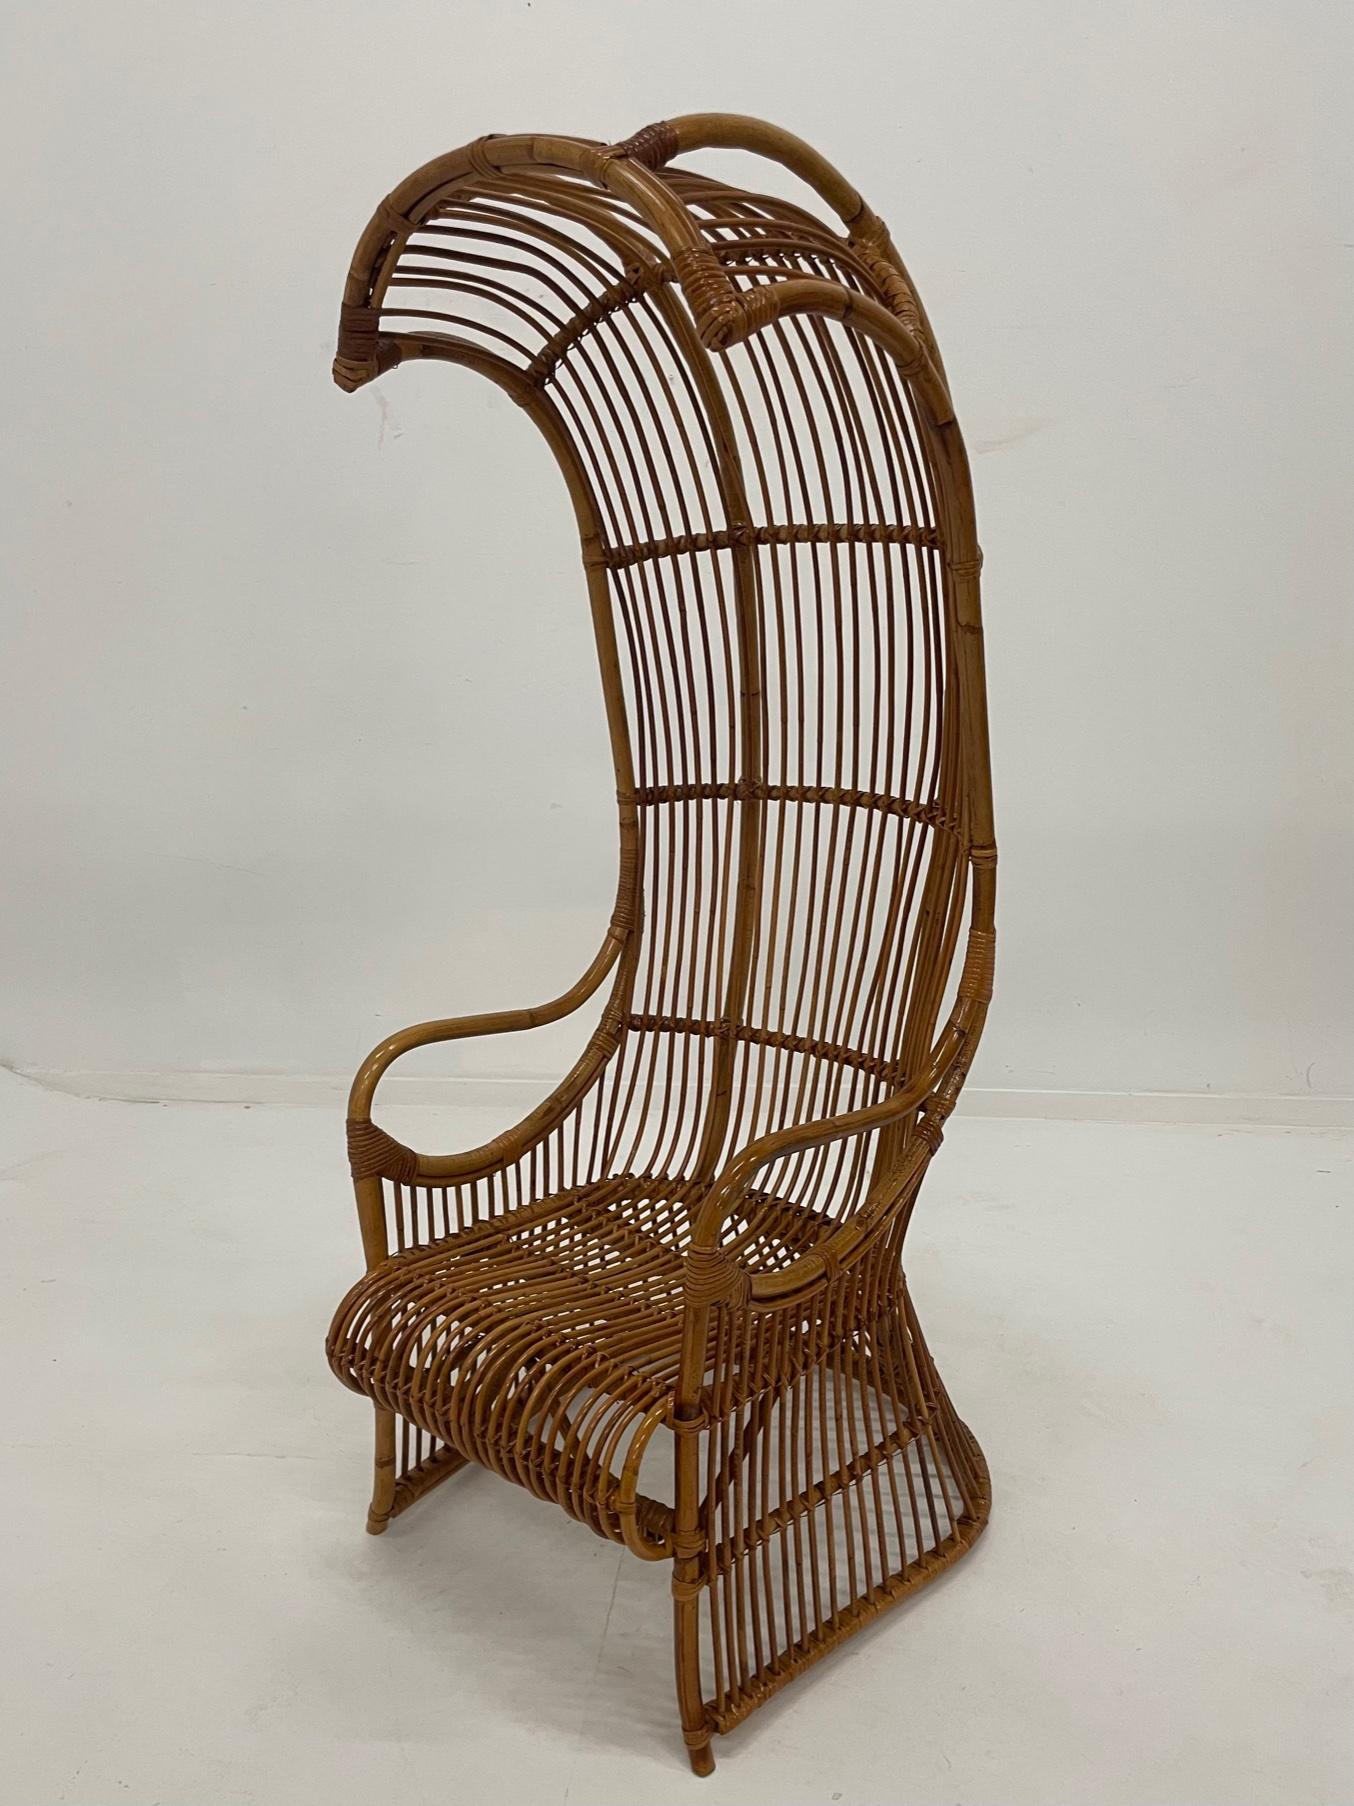 Incredible Rare Vintage Rattan Porters Chair with Sculptural Silhouette For Sale 1